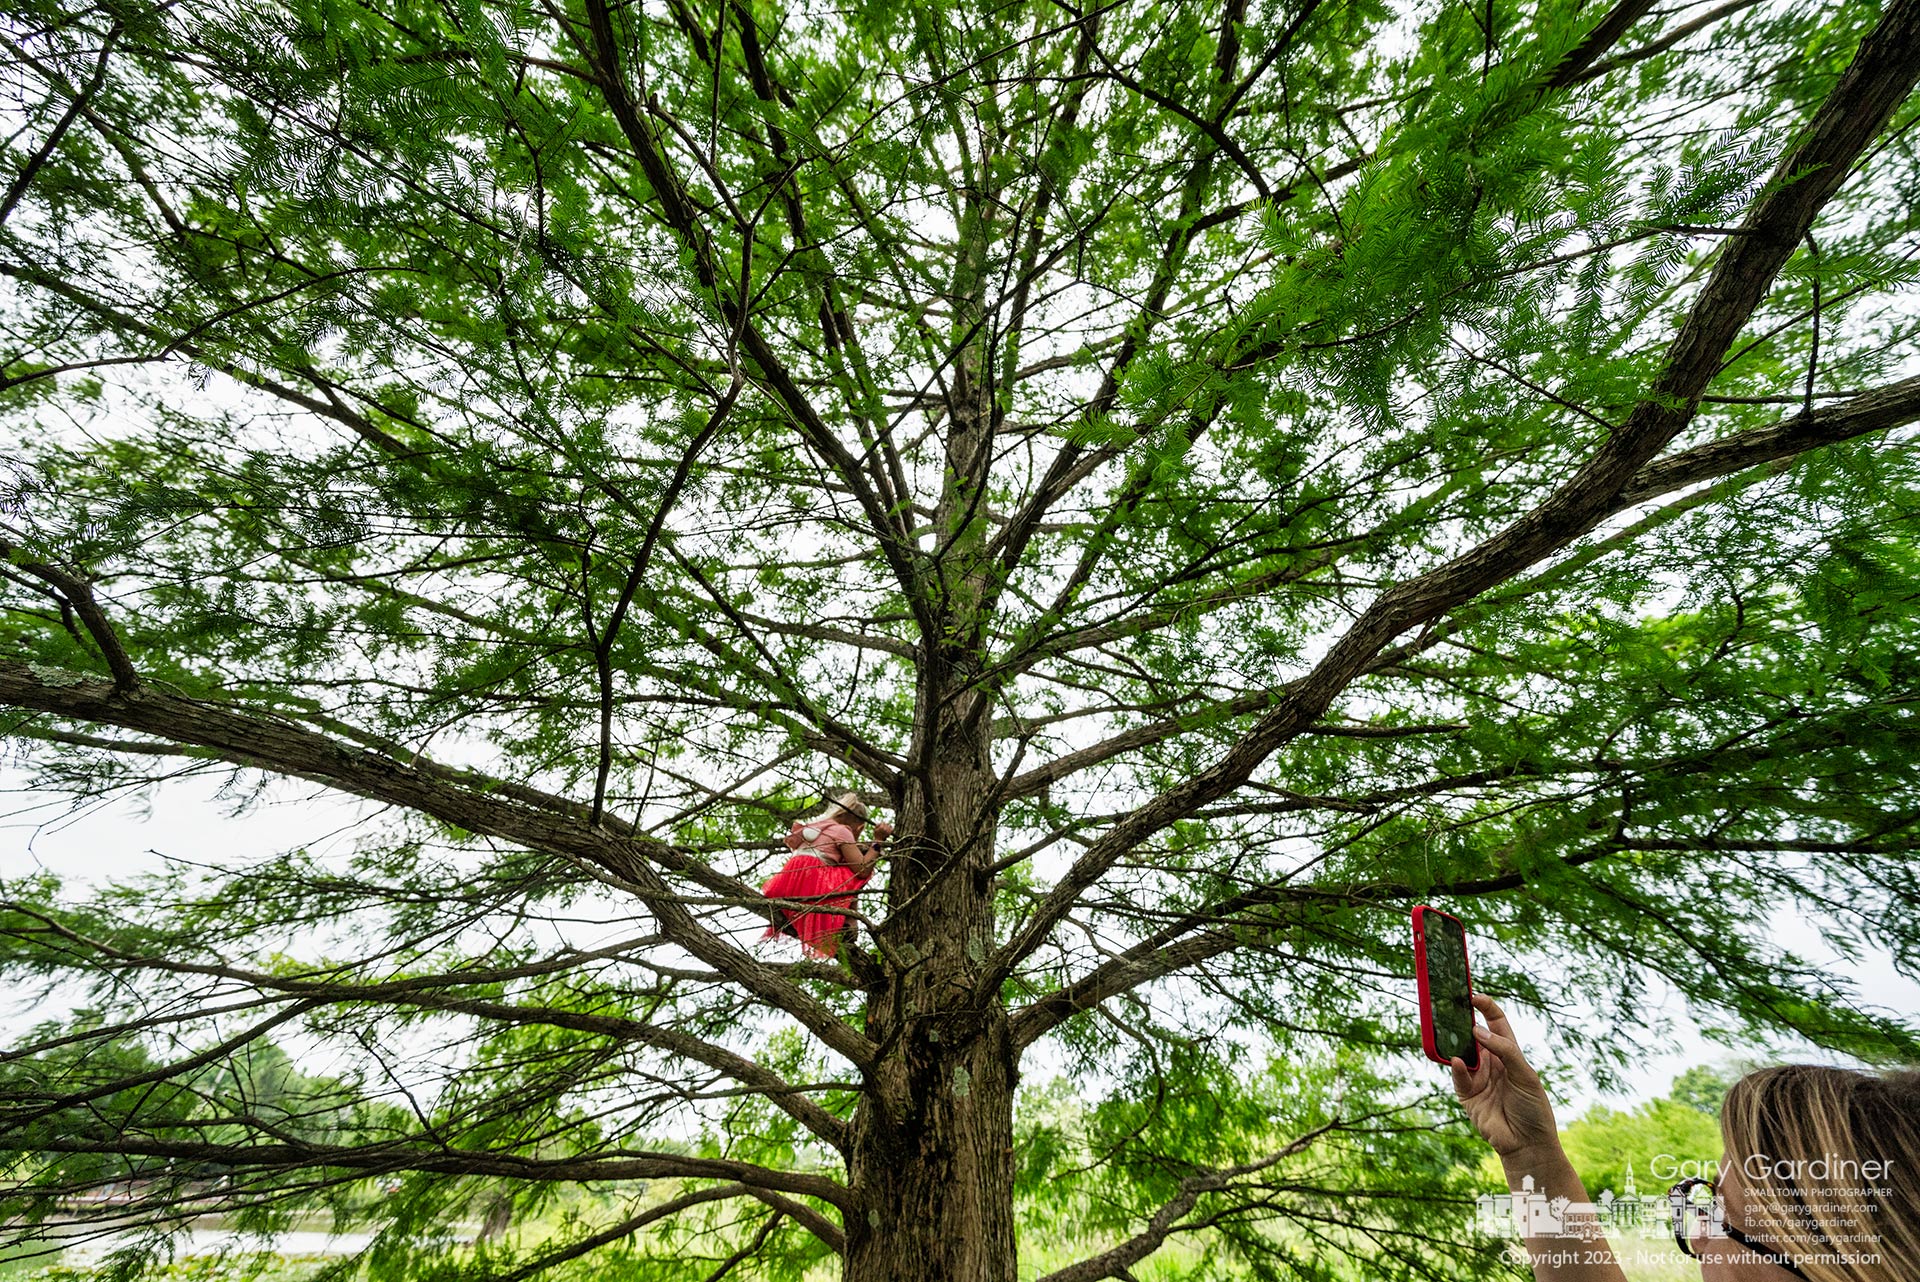 A mother uses her phone to take a photo of her daughter climbing in one of the bald cypress trees at the Highlands wetlands. My Final Photo for June 13, 2023.